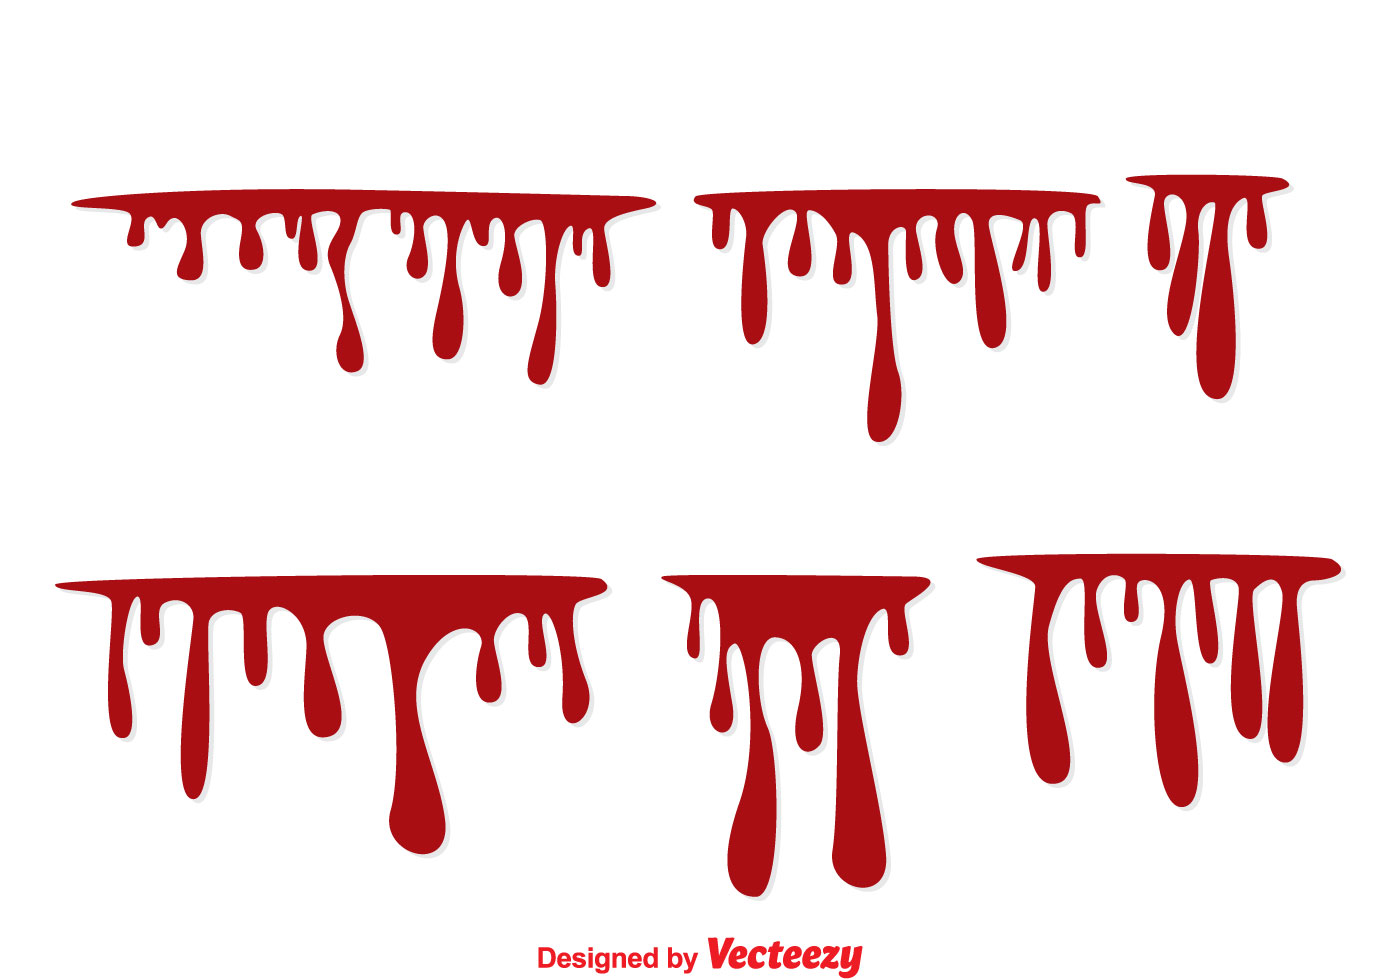 Blood Dripping Vectors - Download Free Vector Art, Stock Graphics & Images